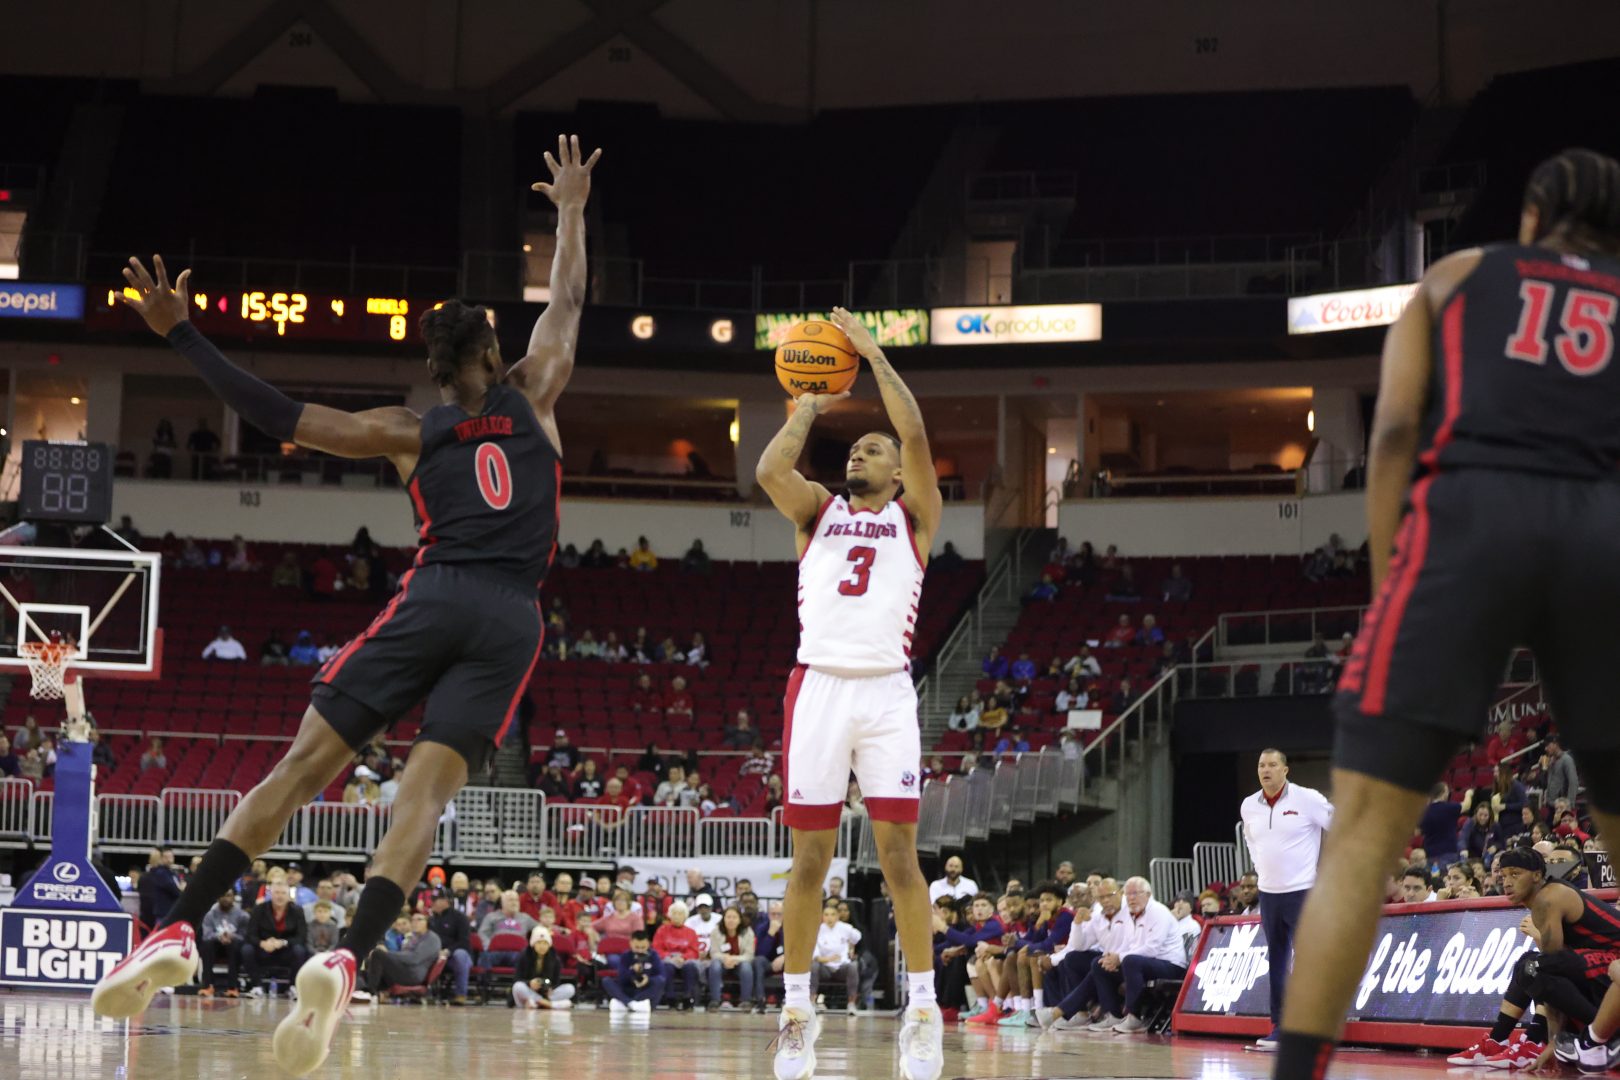 Isaiah Hill, shoots a 3-pointer against a UNLV defender. (Marcos Acosta/The Collegian)